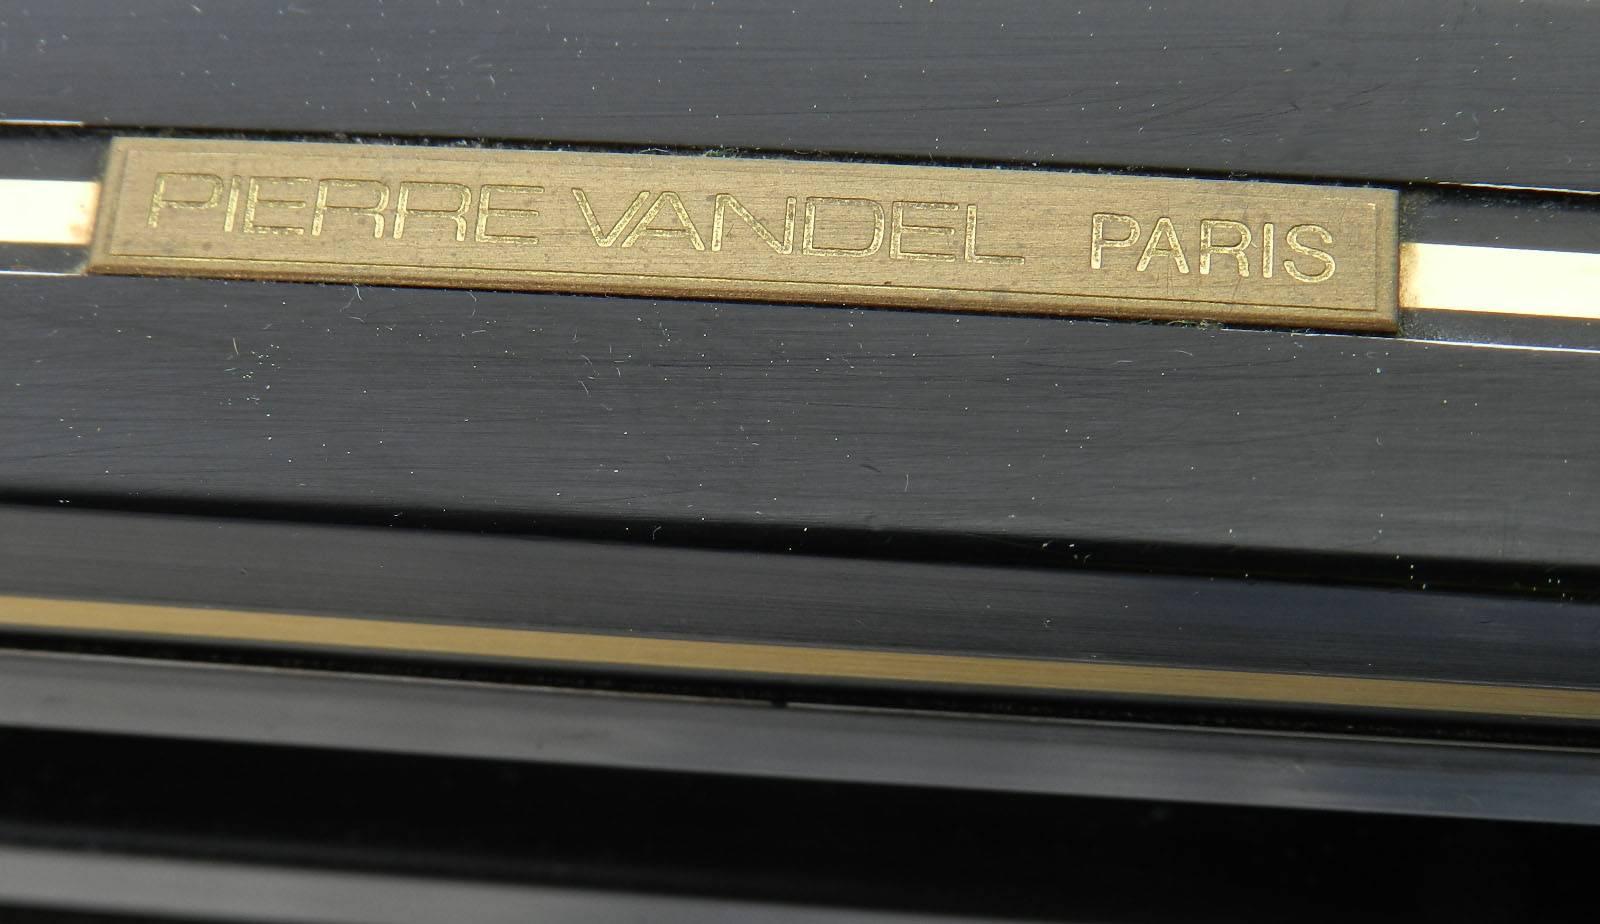 Midcentury coffee table by Pierre Vandel, Paris, France
Makers label
Black lacquered metal frame with brass trim
Beveled glass top
Overall good vintage condition minor scattered surface wear to frame, just one corner has slightly more as shown